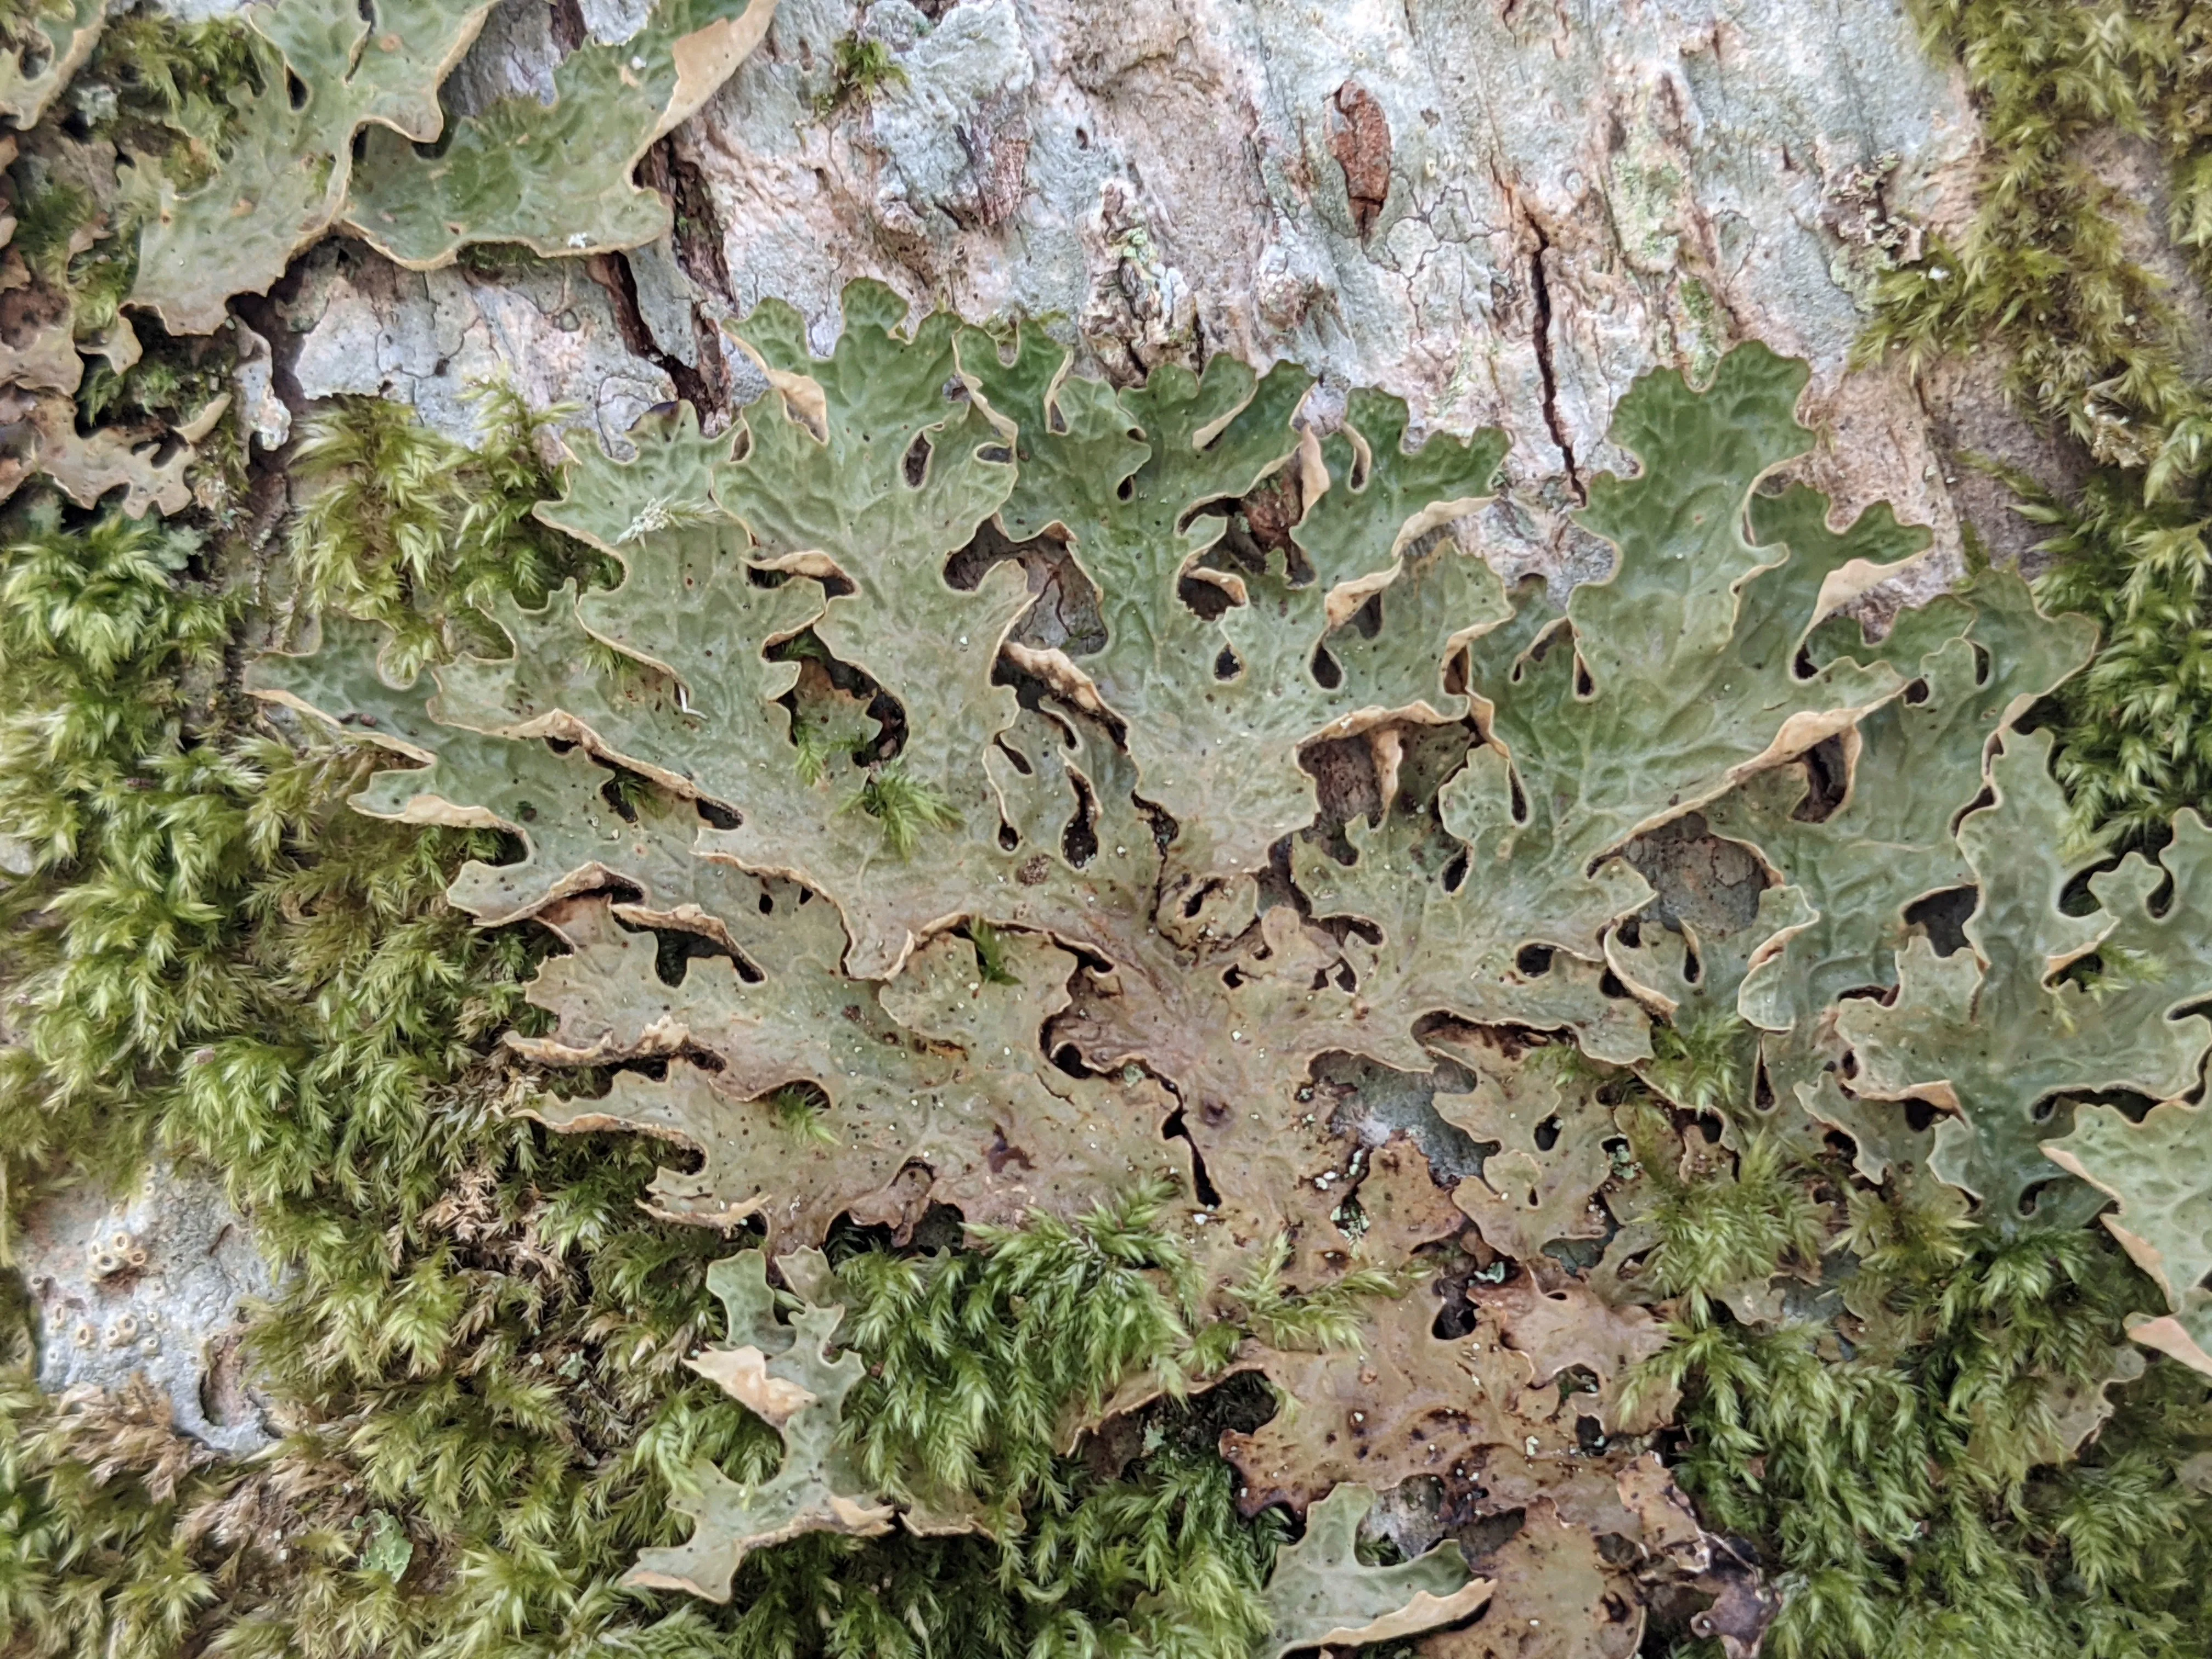 Tree Lungwort lichen, growing up a tree trunk